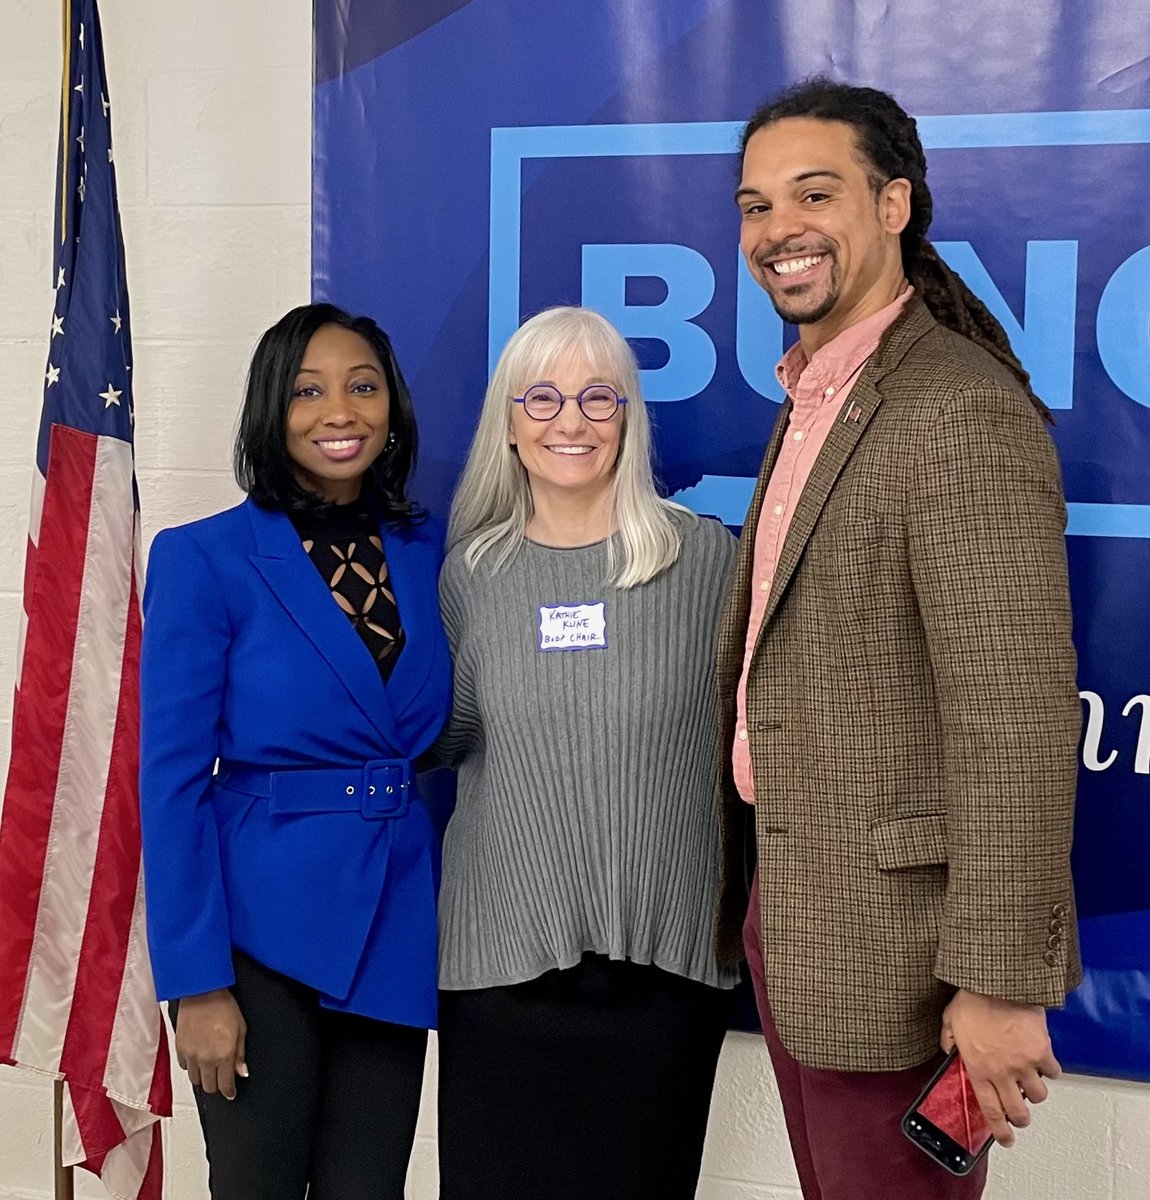 BCDP Chair Kathie Kline welcomed NC State Auditor Jessica Holmes, candidate for re-election, and Braxton Winston, candidate for NC Labor Commissioner, to Buncombe County last weekend for several campaign events. @JessicaforNC @votebraxton #BuncombeBlue #Democrats #BCDP